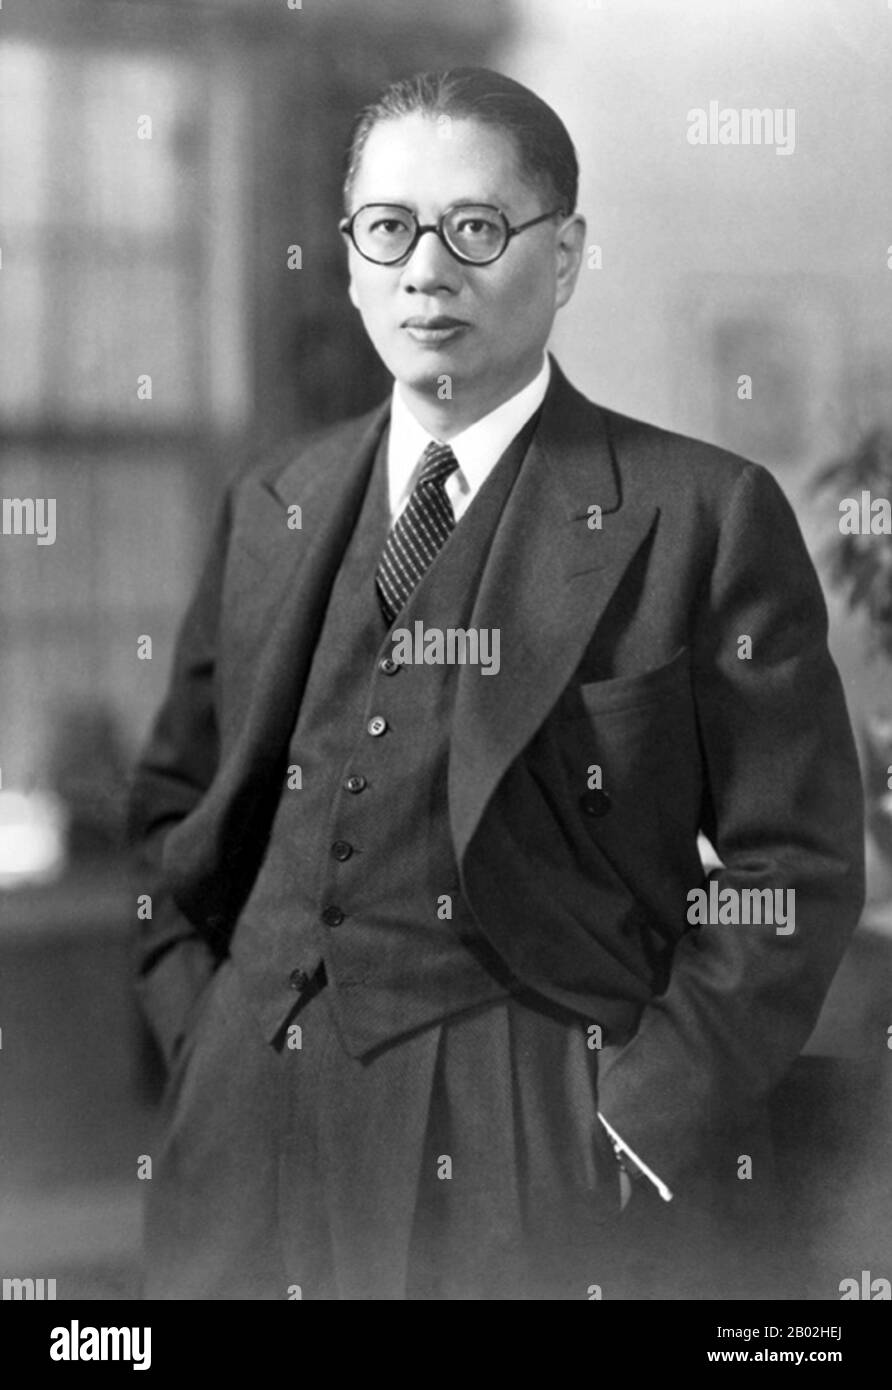 Soong Tse-ven or Soong Tzu-wen (Chinese: 宋子文; pinyin: Sòng Zǐwén; December 4, 1891 – April 26, 1971), was a prominent businessman and politician in the early 20th century Republic of China.  His father was Charlie Soong and his siblings were the Soong sisters. His Christian name was Paul, but he is generally known in English as T. V. Soong. As brother to the three Soong sisters, Soong's brothers-in-law were Dr. Sun Yat-sen, Generalissimo Chiang Kai-shek, and financier H. H. Kung. Stock Photo